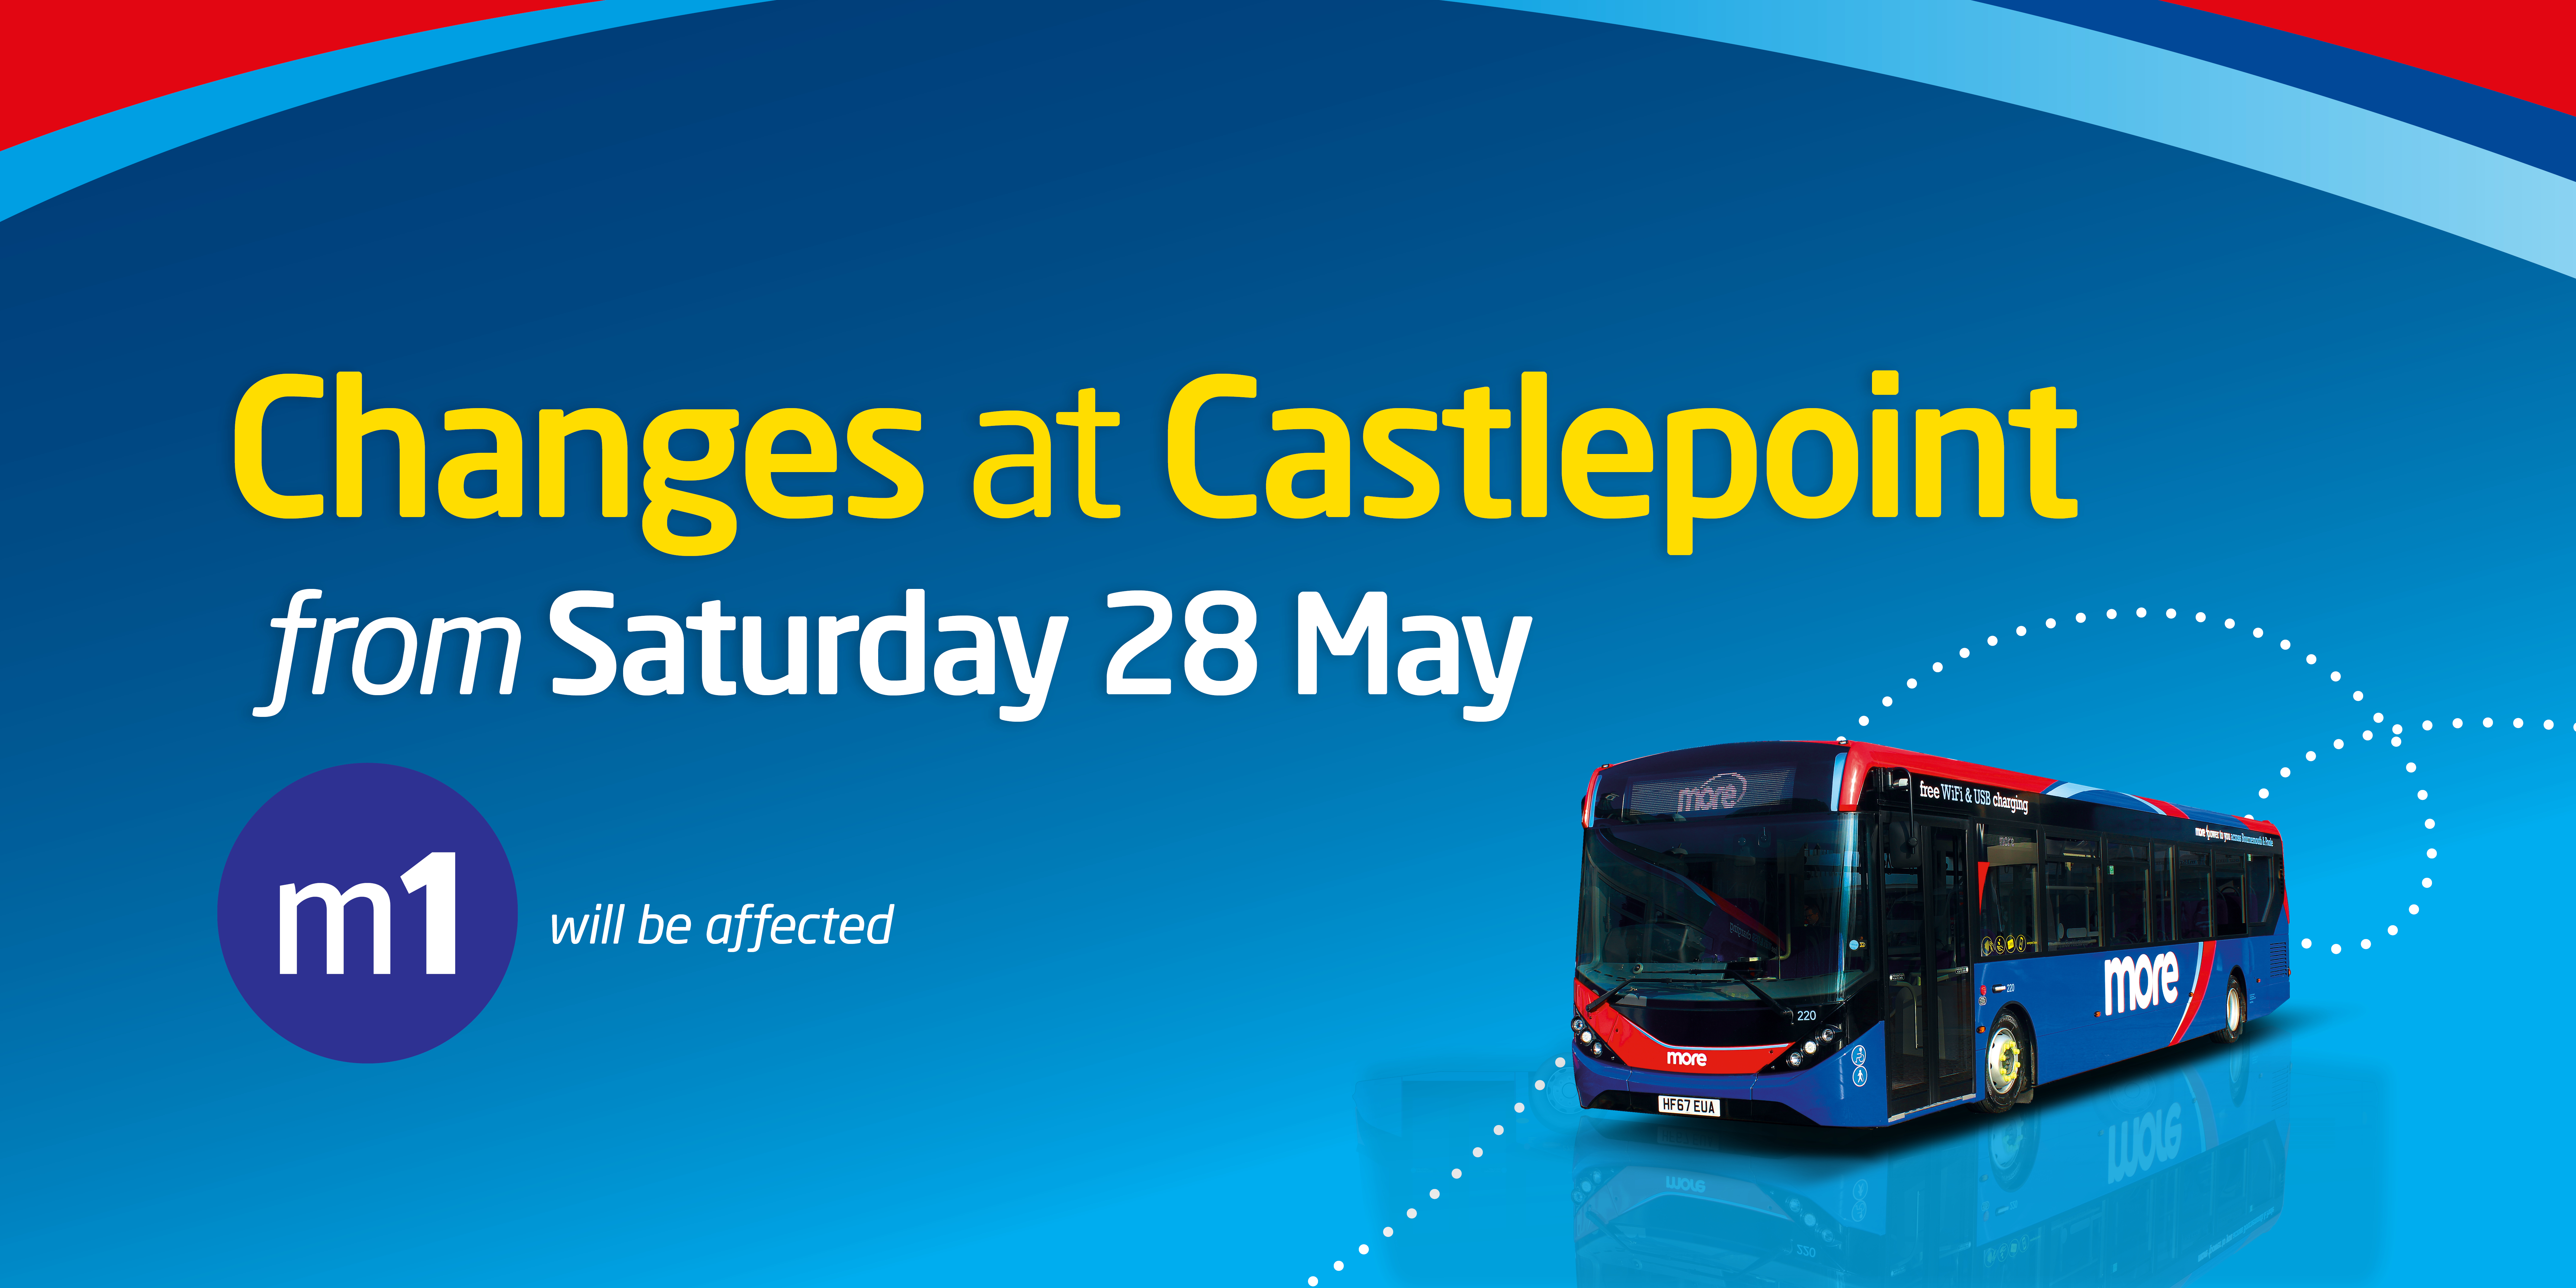 changes at castlepoint from saturday 28 may